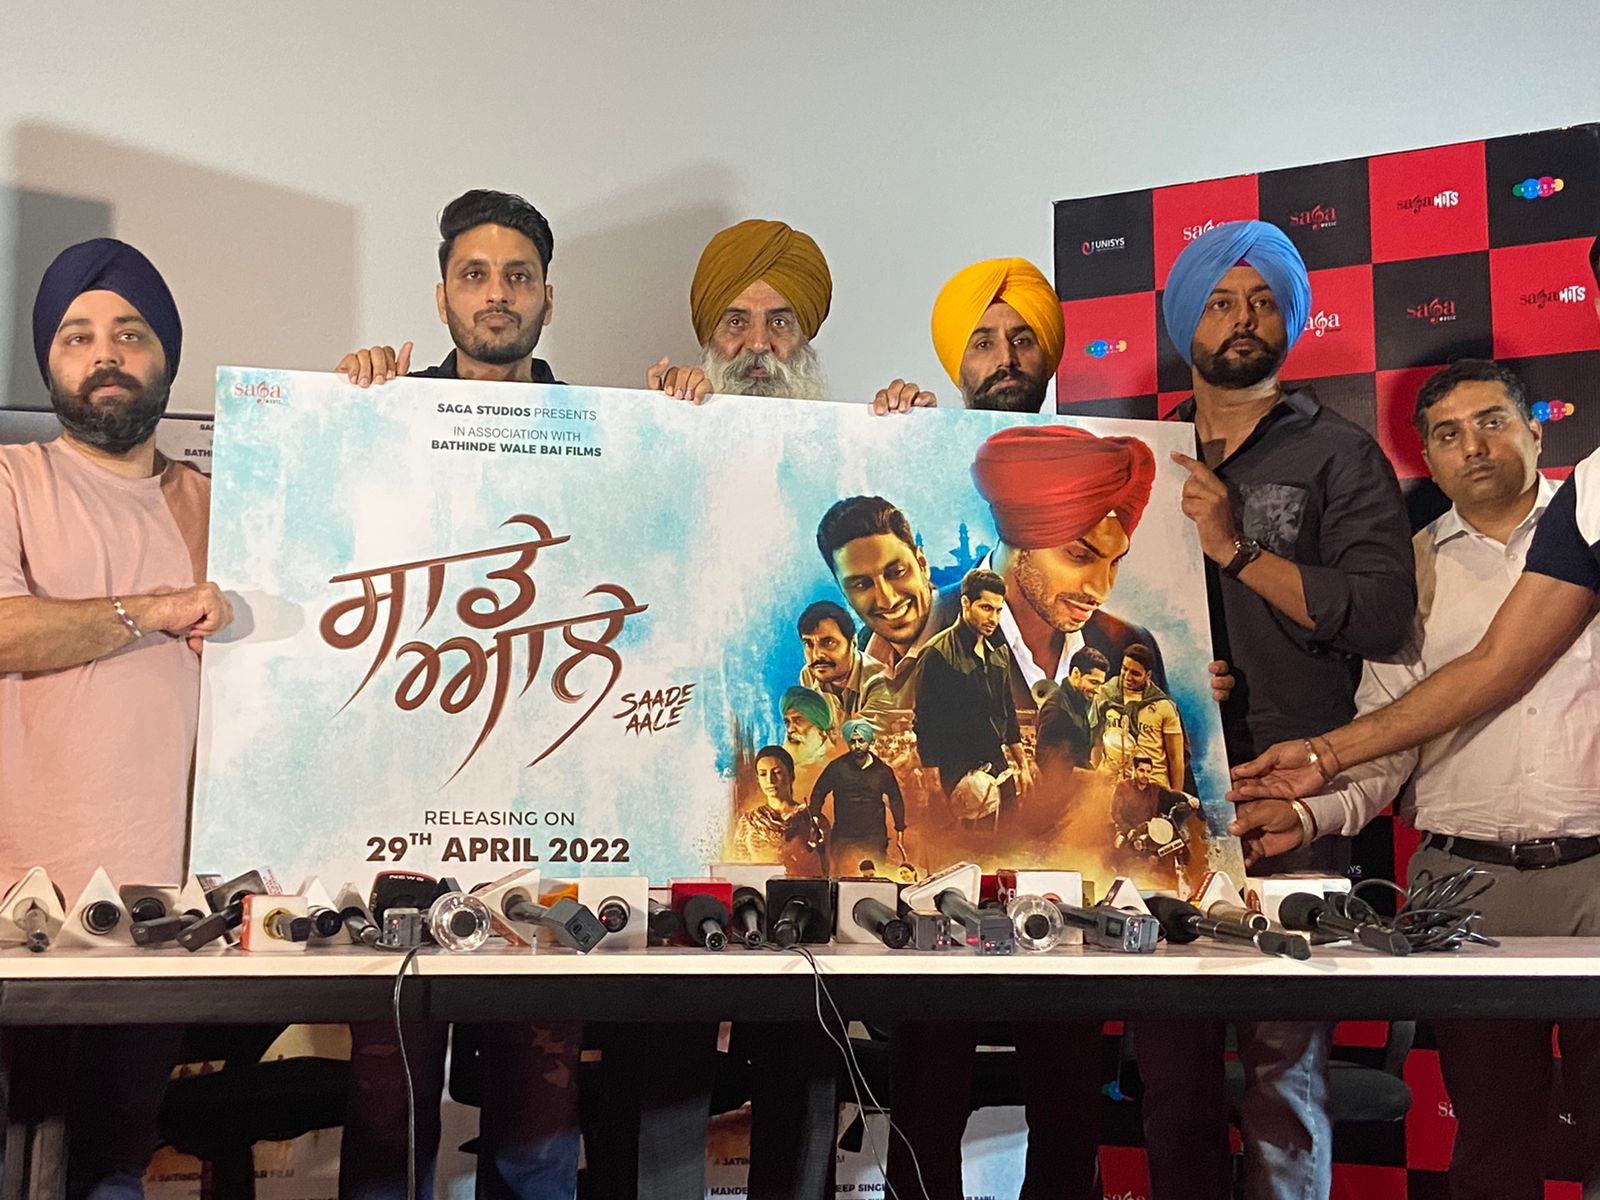 uploads/Punjabi Movie Saade Aale Trailer and Poster Launched